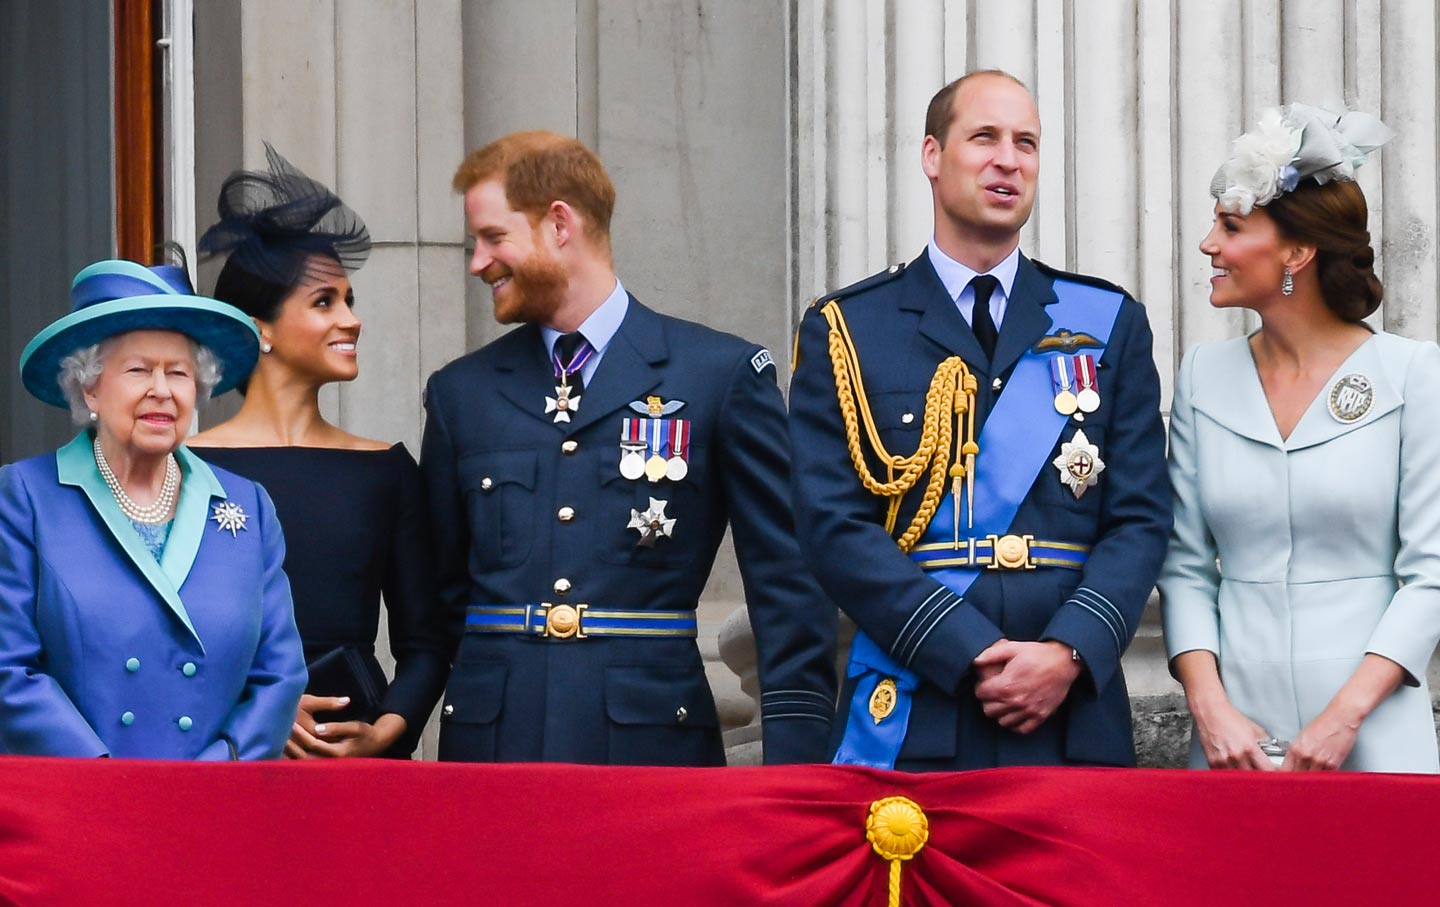 Harry and Meghan’s Interview Has Given a Welcome Boost to the Anti-Monarchy Movement